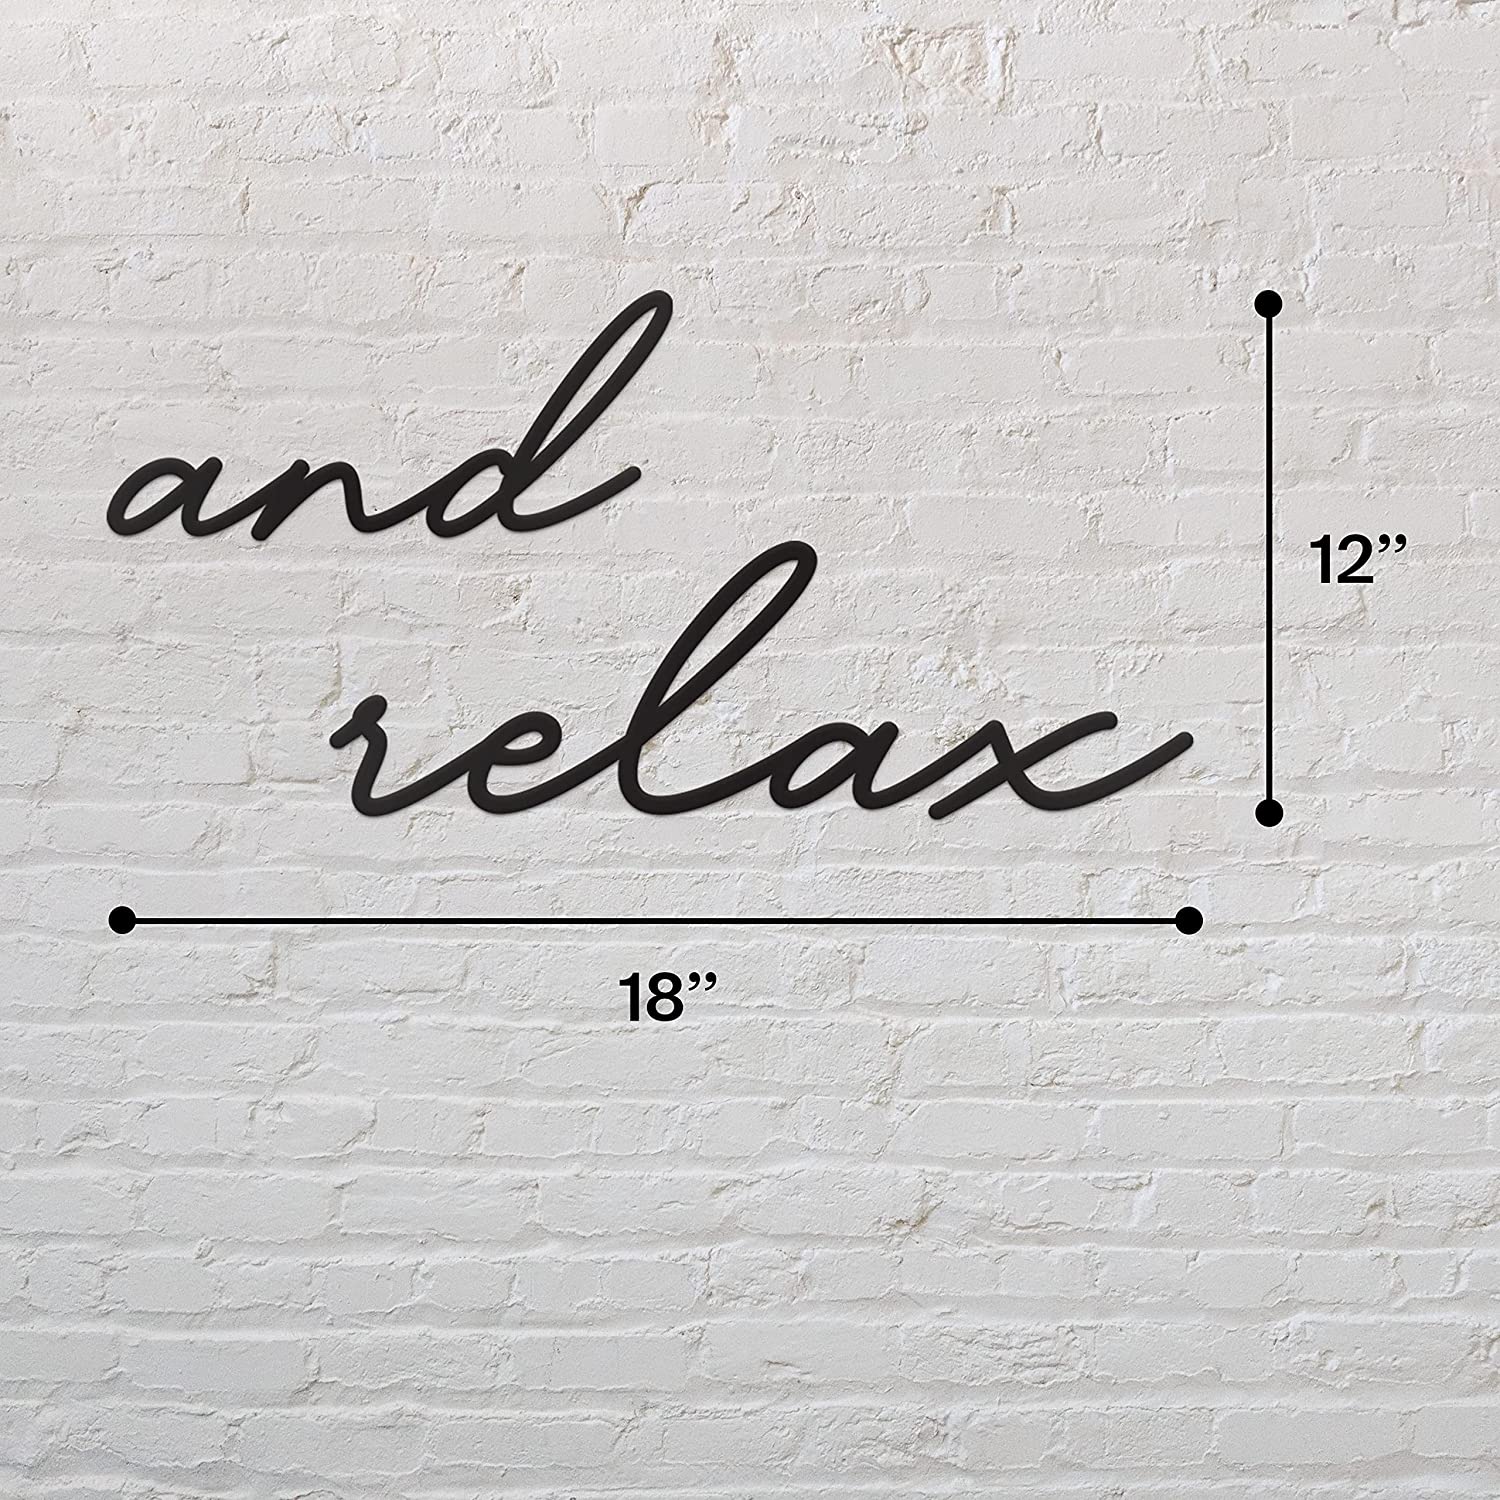 And Relax Sign Metal Wall Sign - 18"X12" Perfect Relax Wall Sign Bathroom Decorations for Wall Decor